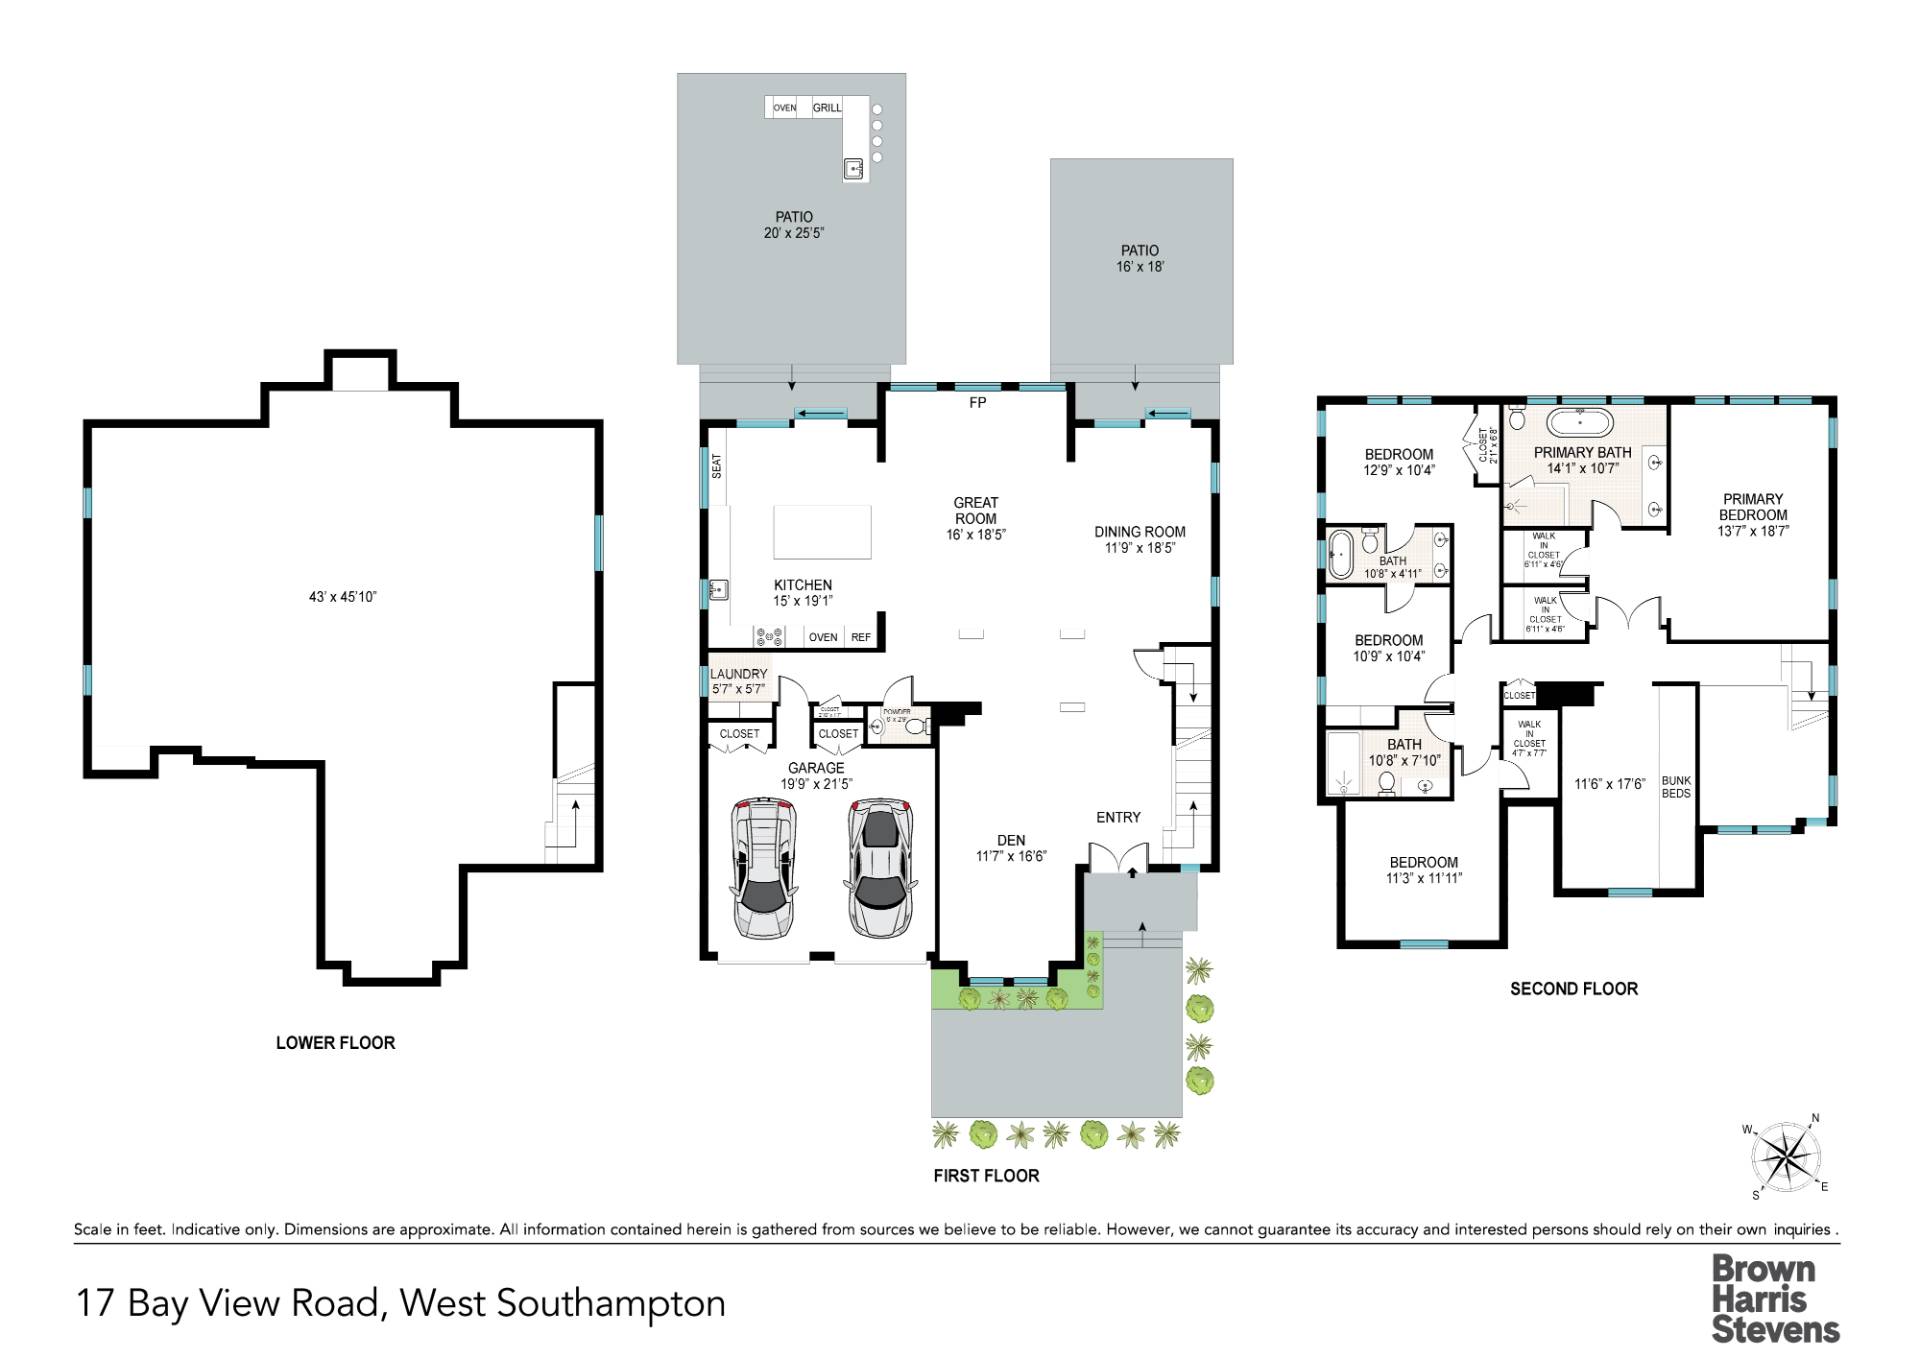 Floorplan for 17 Bay View Road West